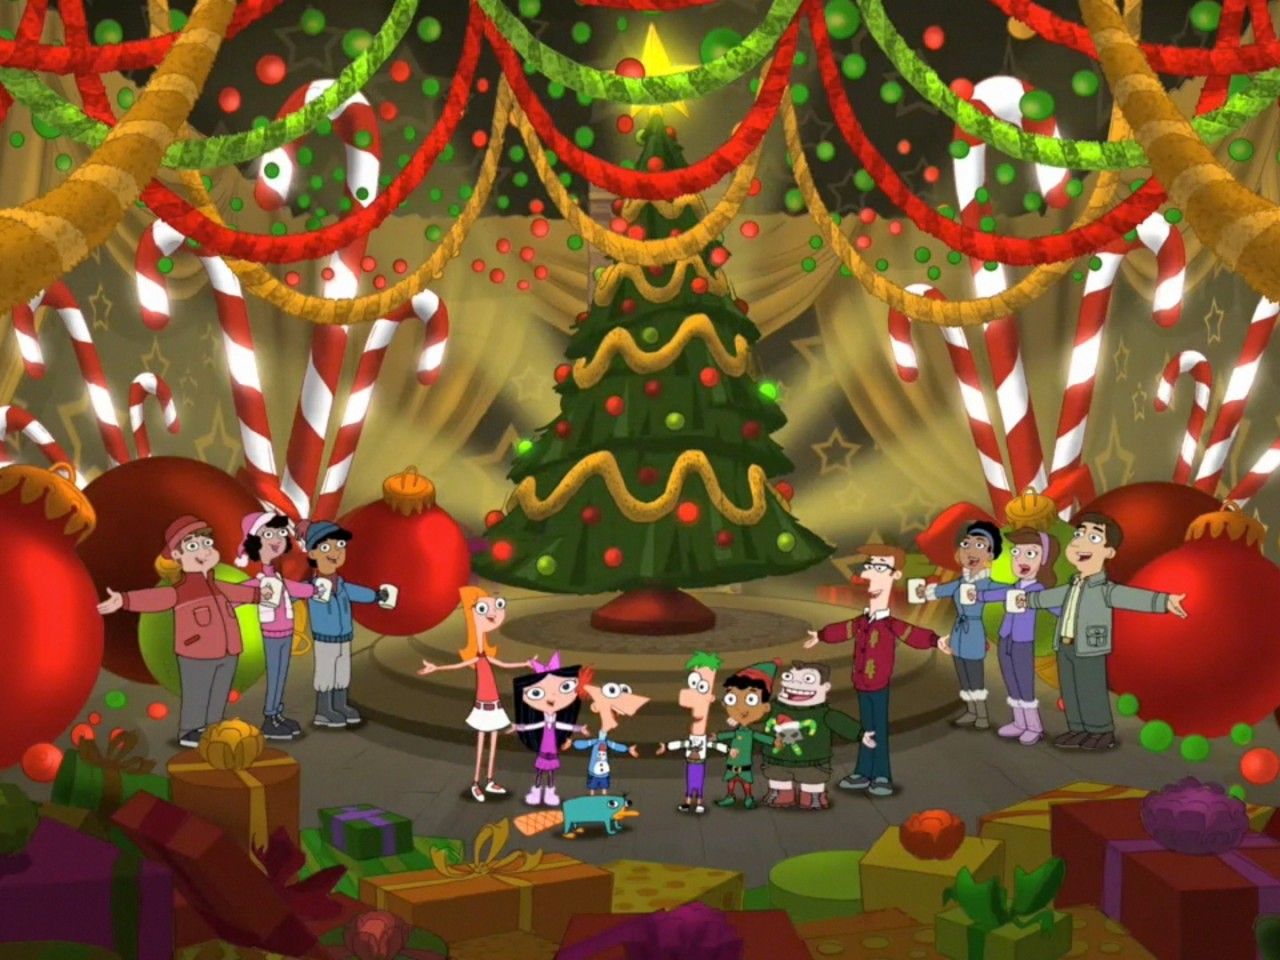 Phineas and Ferb Christmas Wallpaper - HD Wallpapers